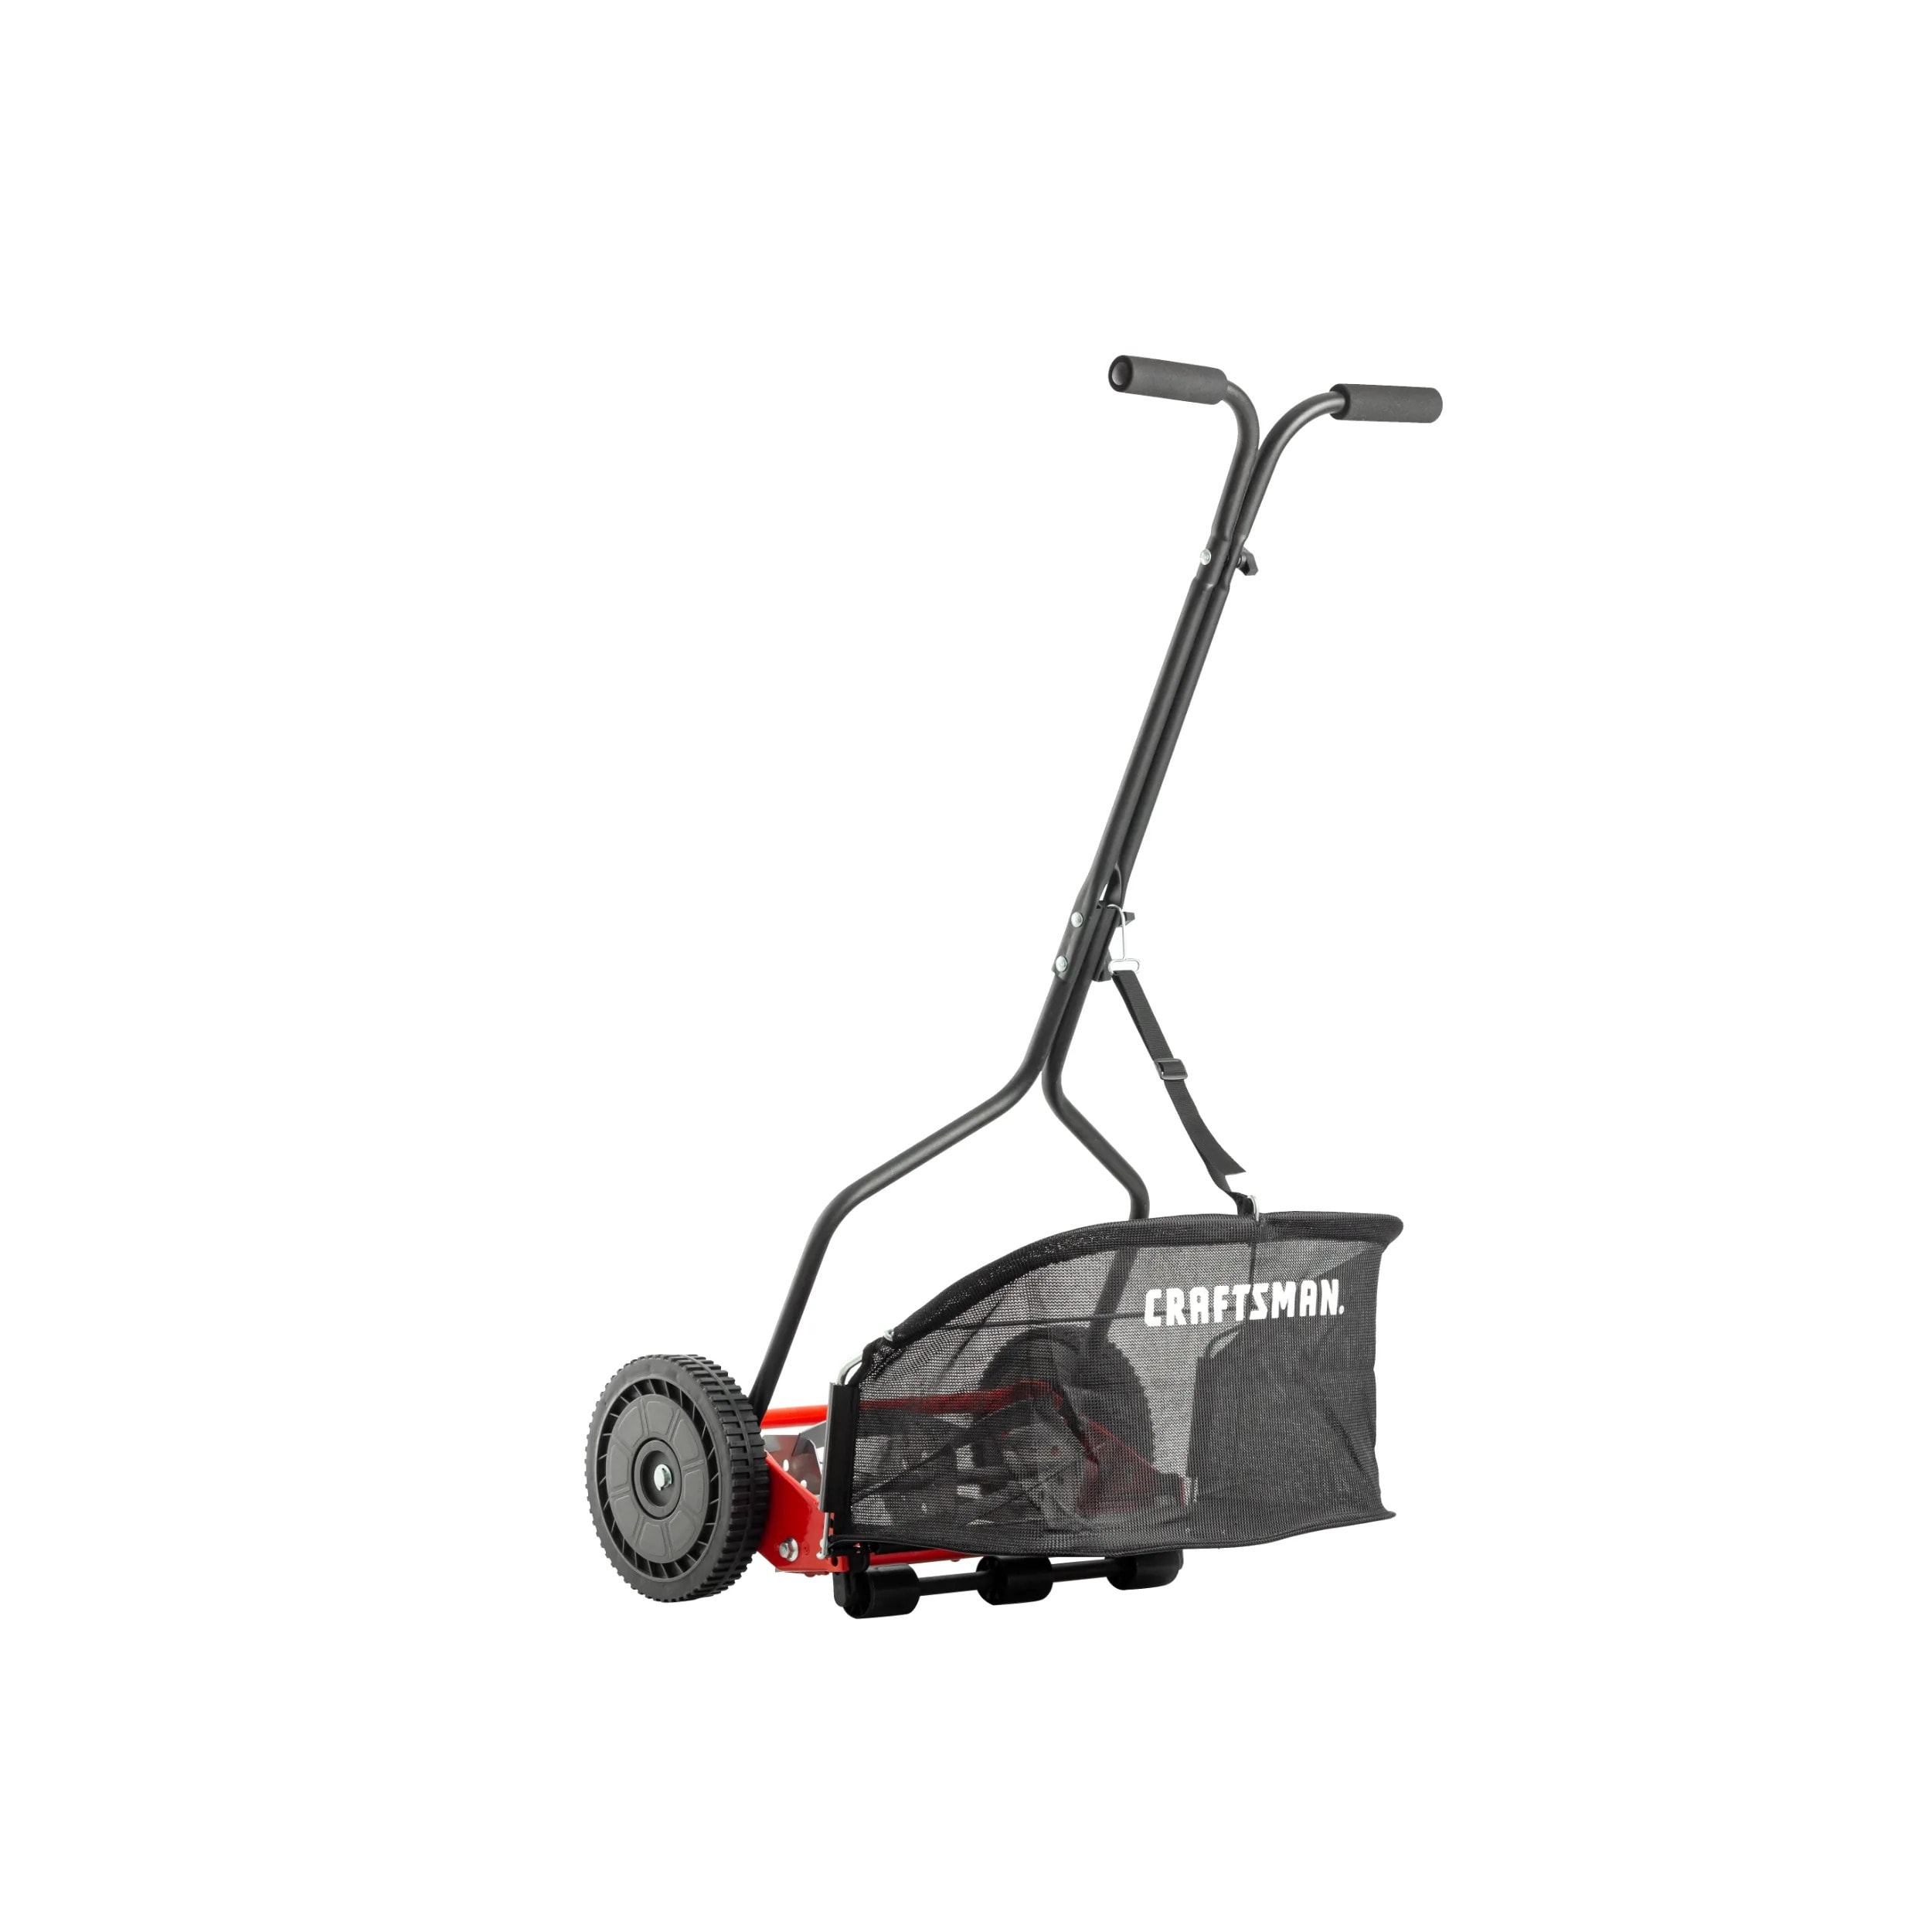 CRAFTSMAN 14-Inch Reel Lawn Mower with Bagger, 5-Blade Manual Push Mower,  Adjustable Cutting Height, Lightweight Design, Steel Deck in the Reel Lawn  Mowers department at